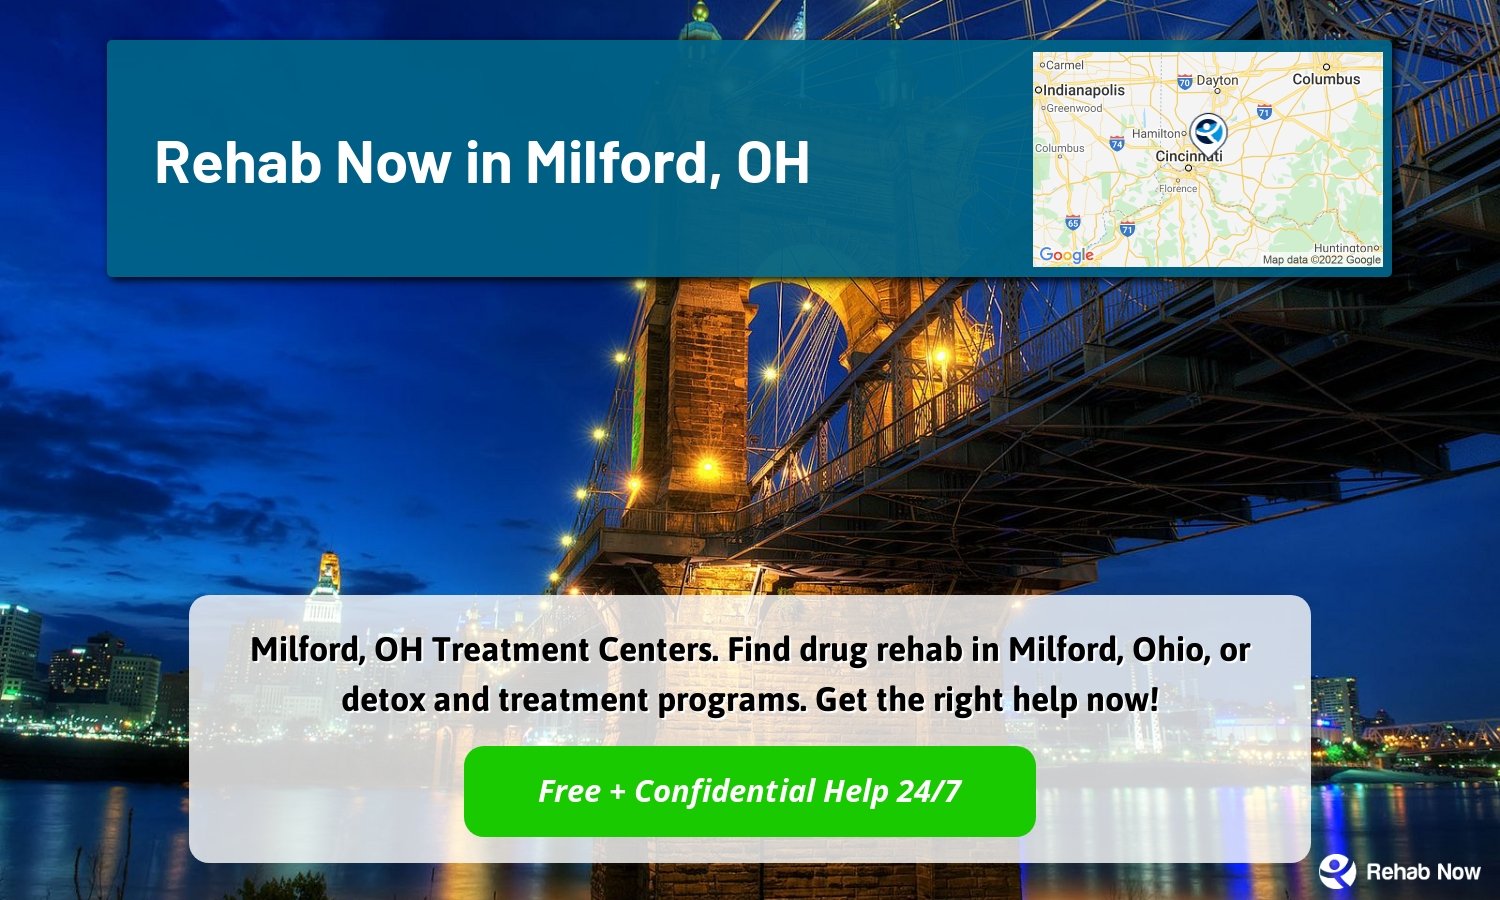 Milford, OH Treatment Centers. Find drug rehab in Milford, Ohio, or detox and treatment programs. Get the right help now!